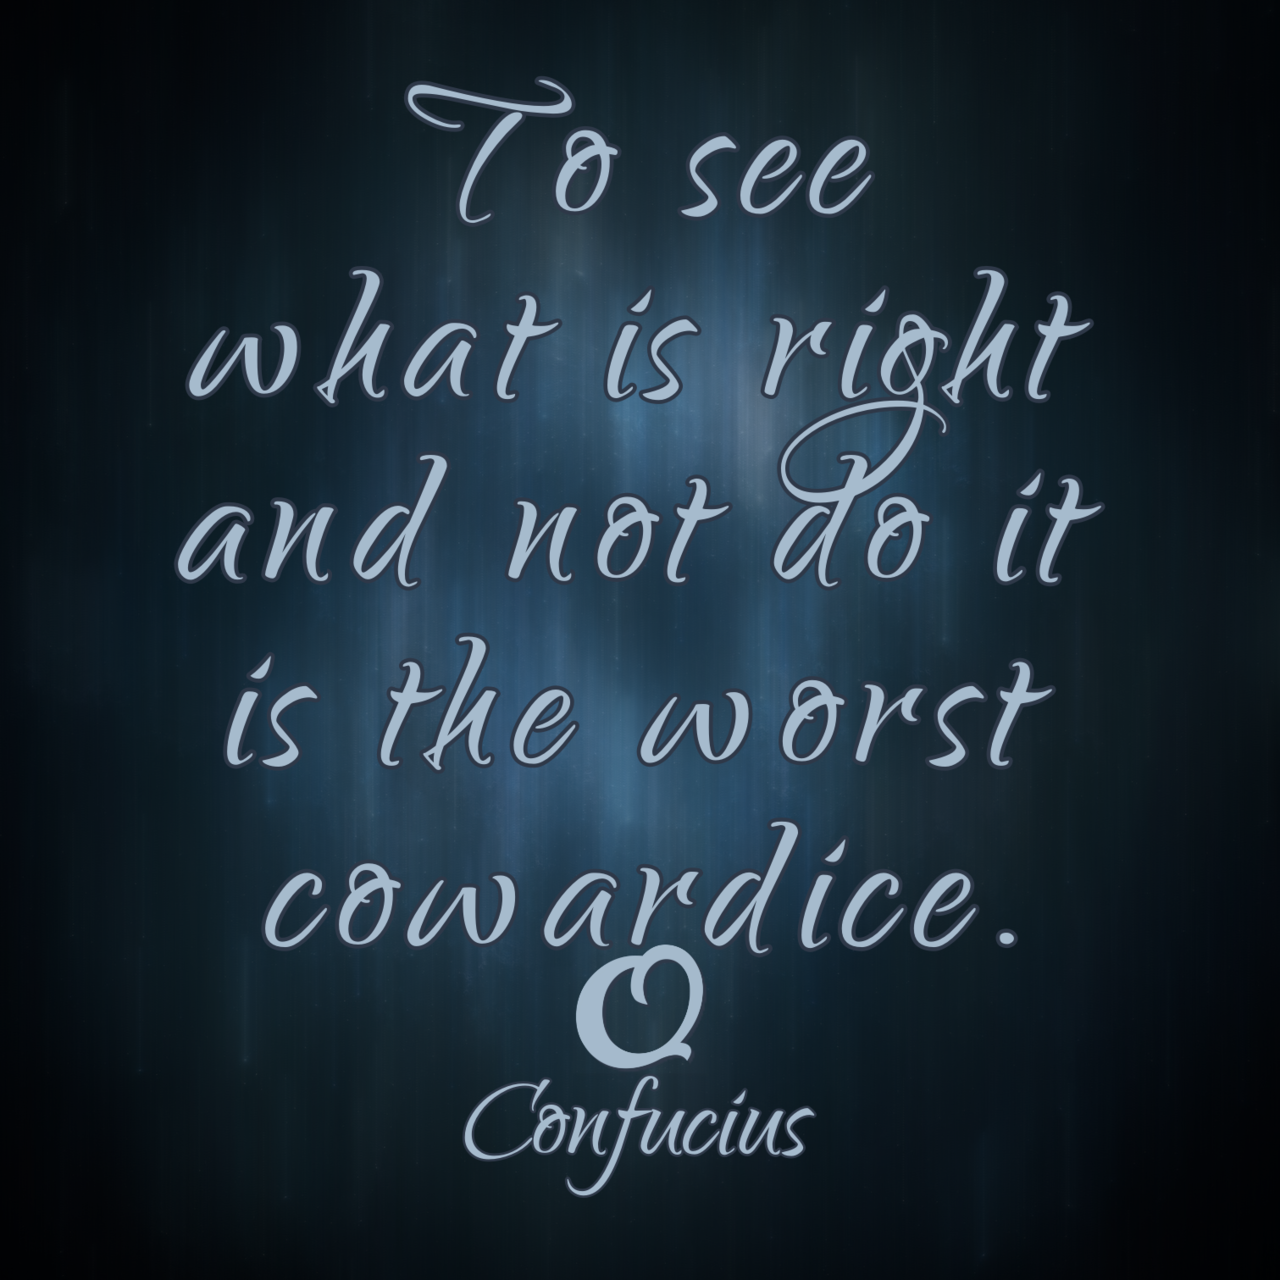 Confucius “To see what is right and not do it is the worst cowardice.”